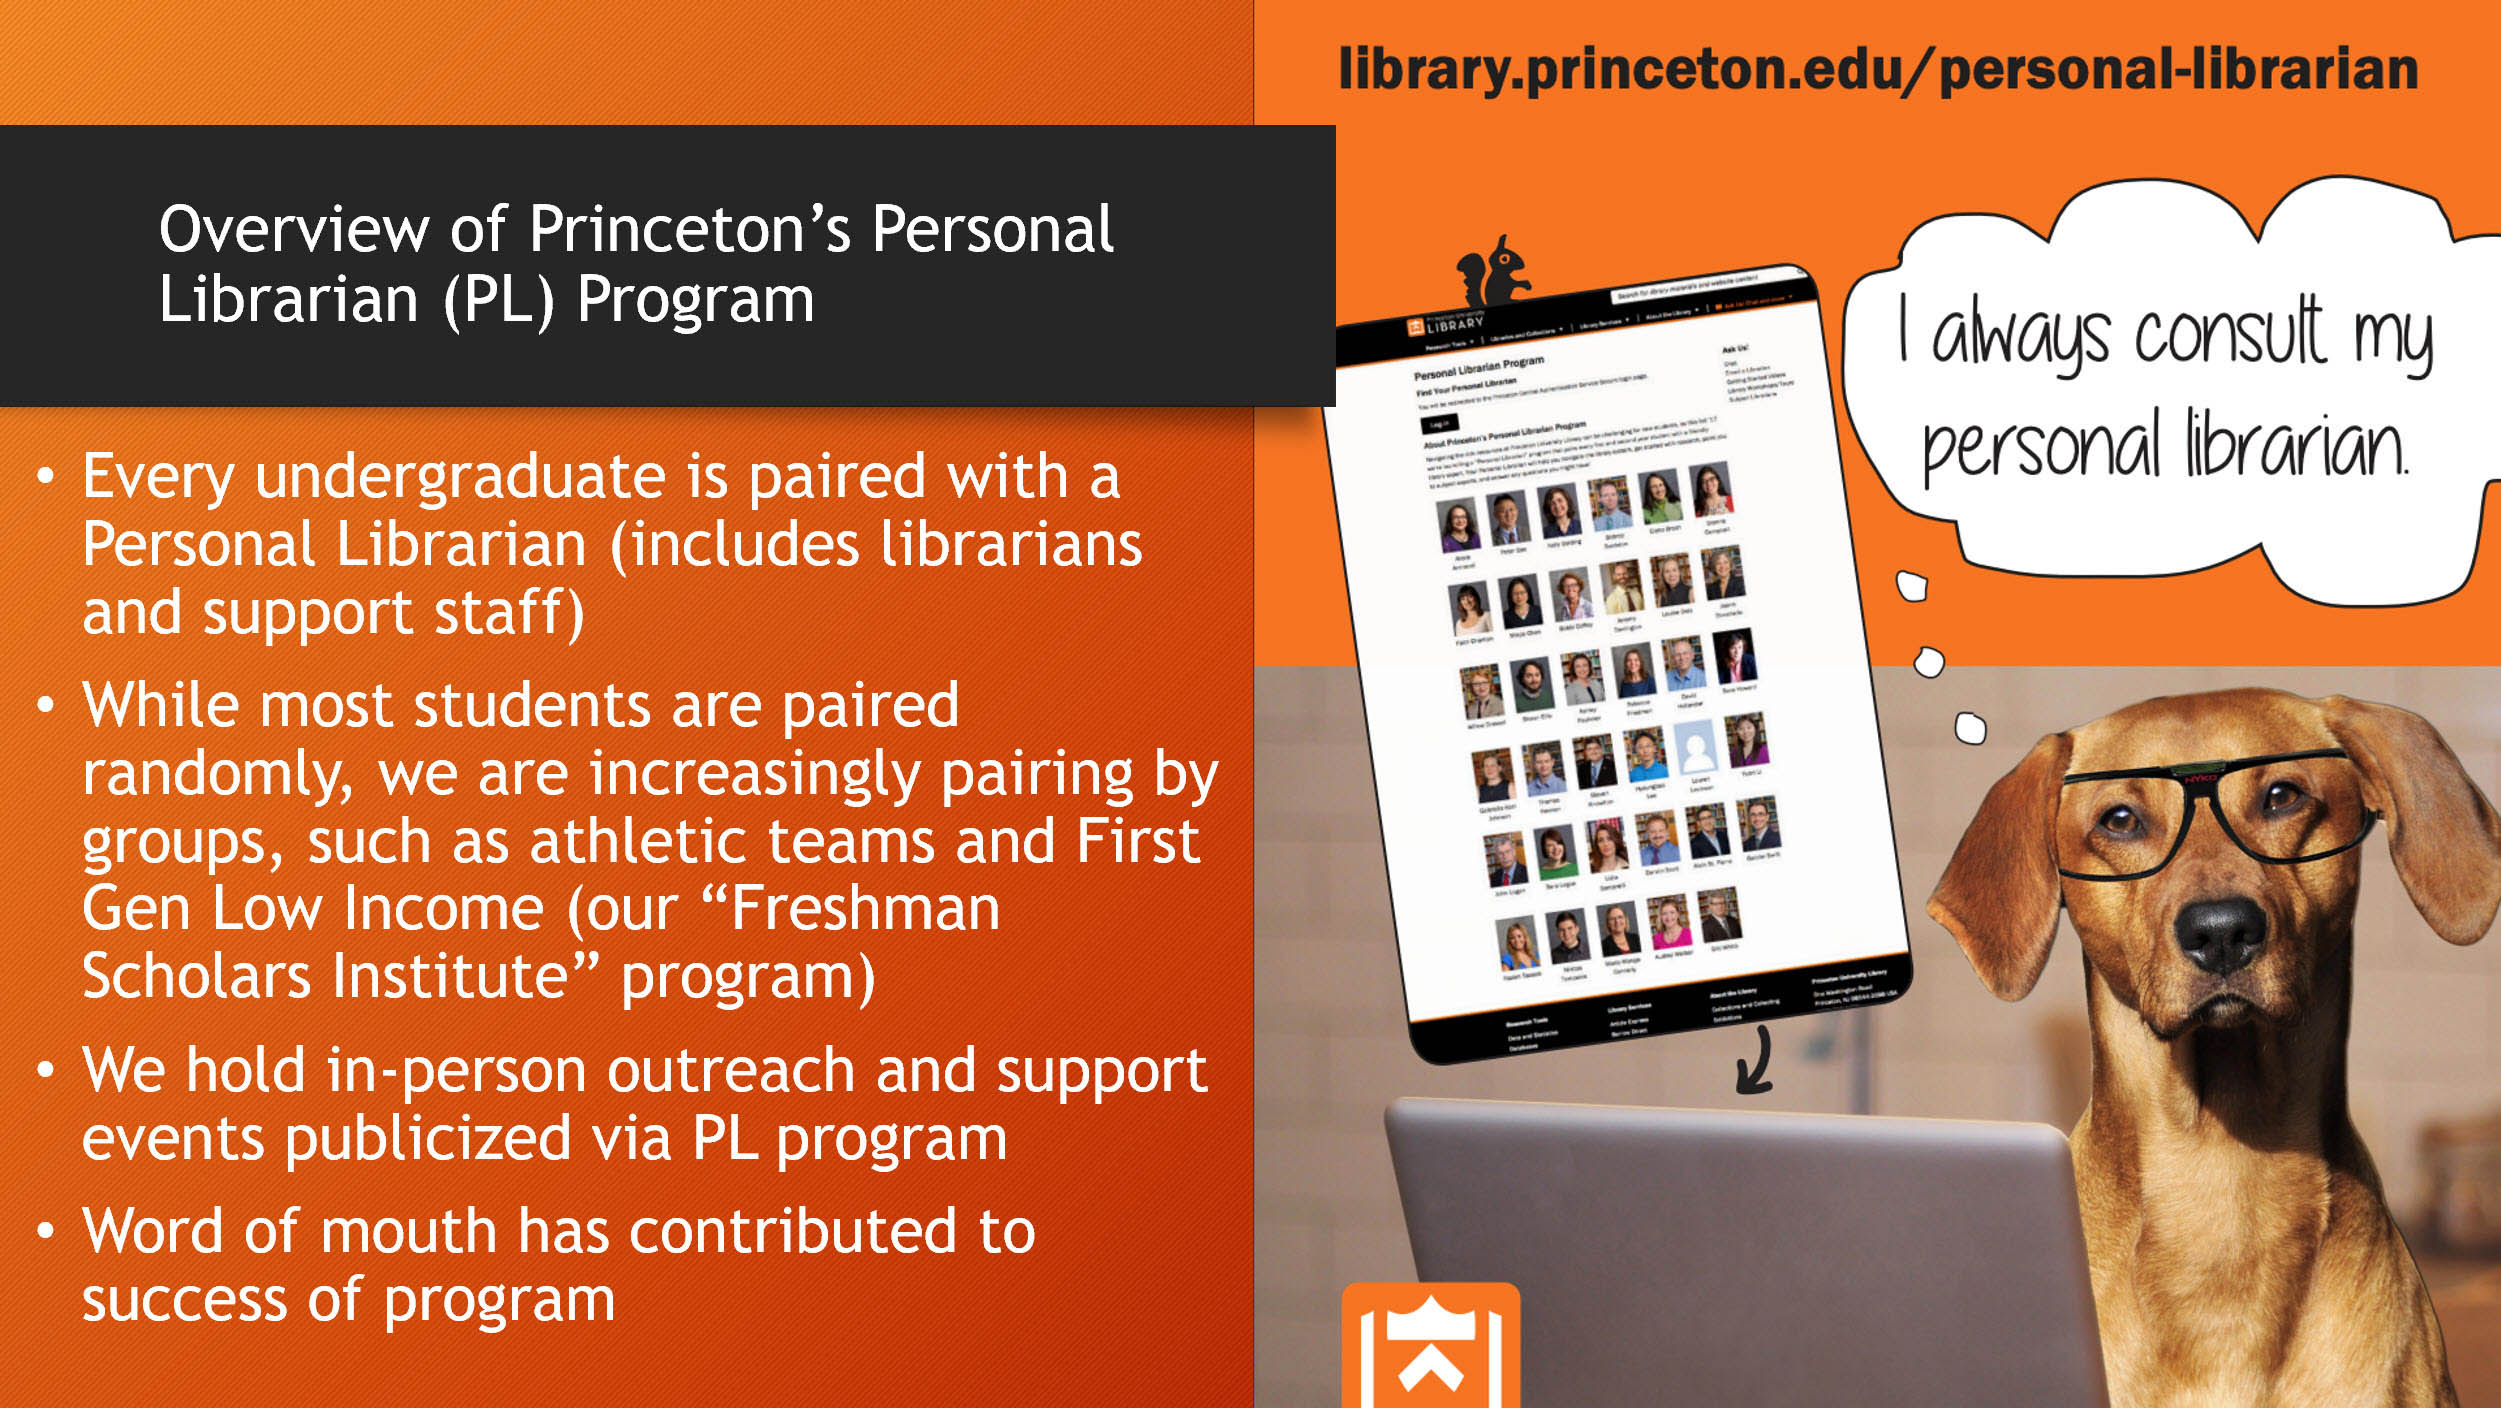 Overview of Princeton's Personal (PL) Librarian Program